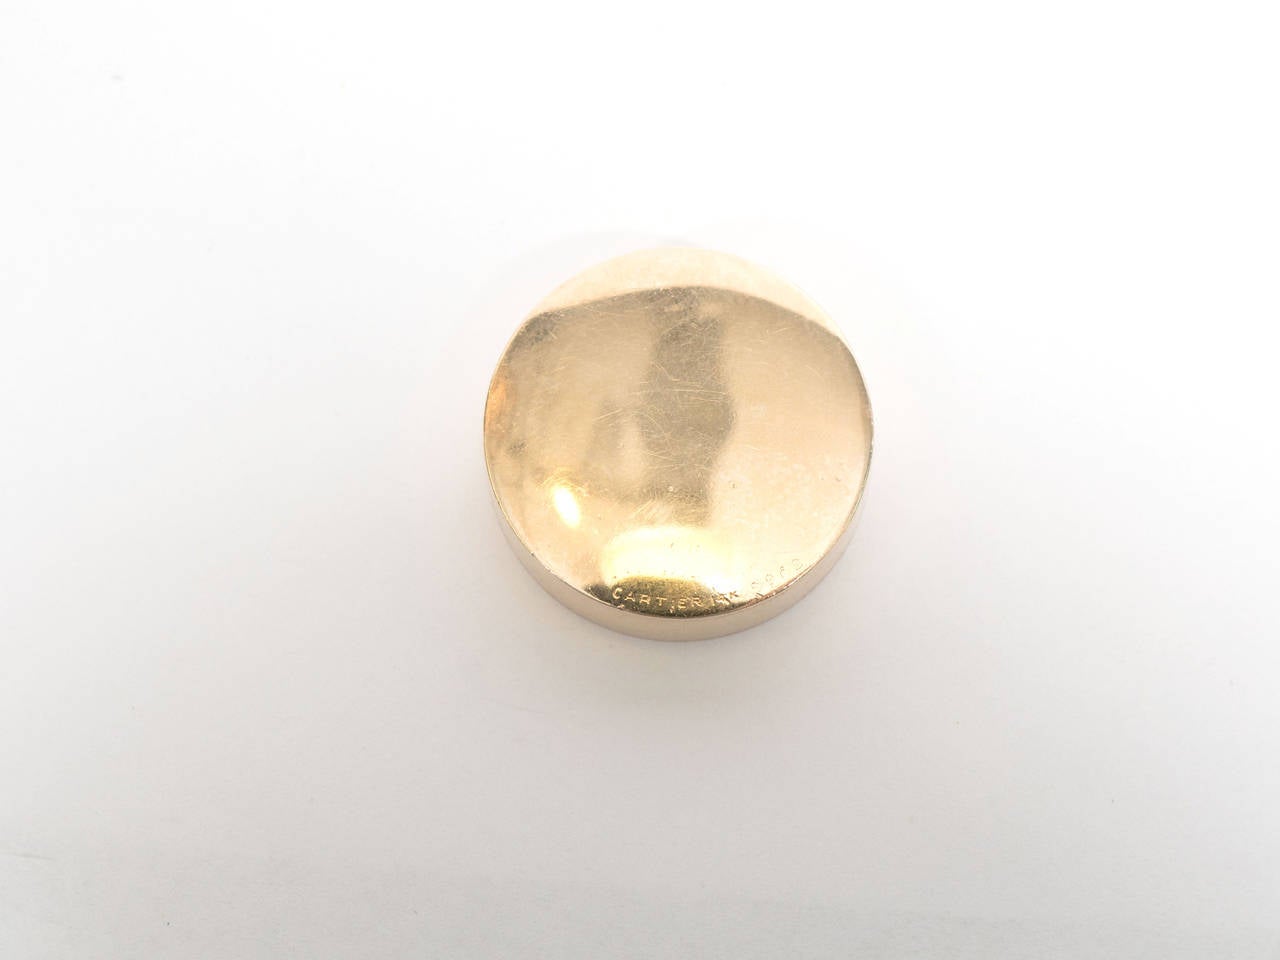 A vintage 14-karat gold circular design pill box with pull ring. Can also be used as a pendant. Marked Cartier on the bottom.

Good vintage condition with age appropriate wear. A few light scratches.